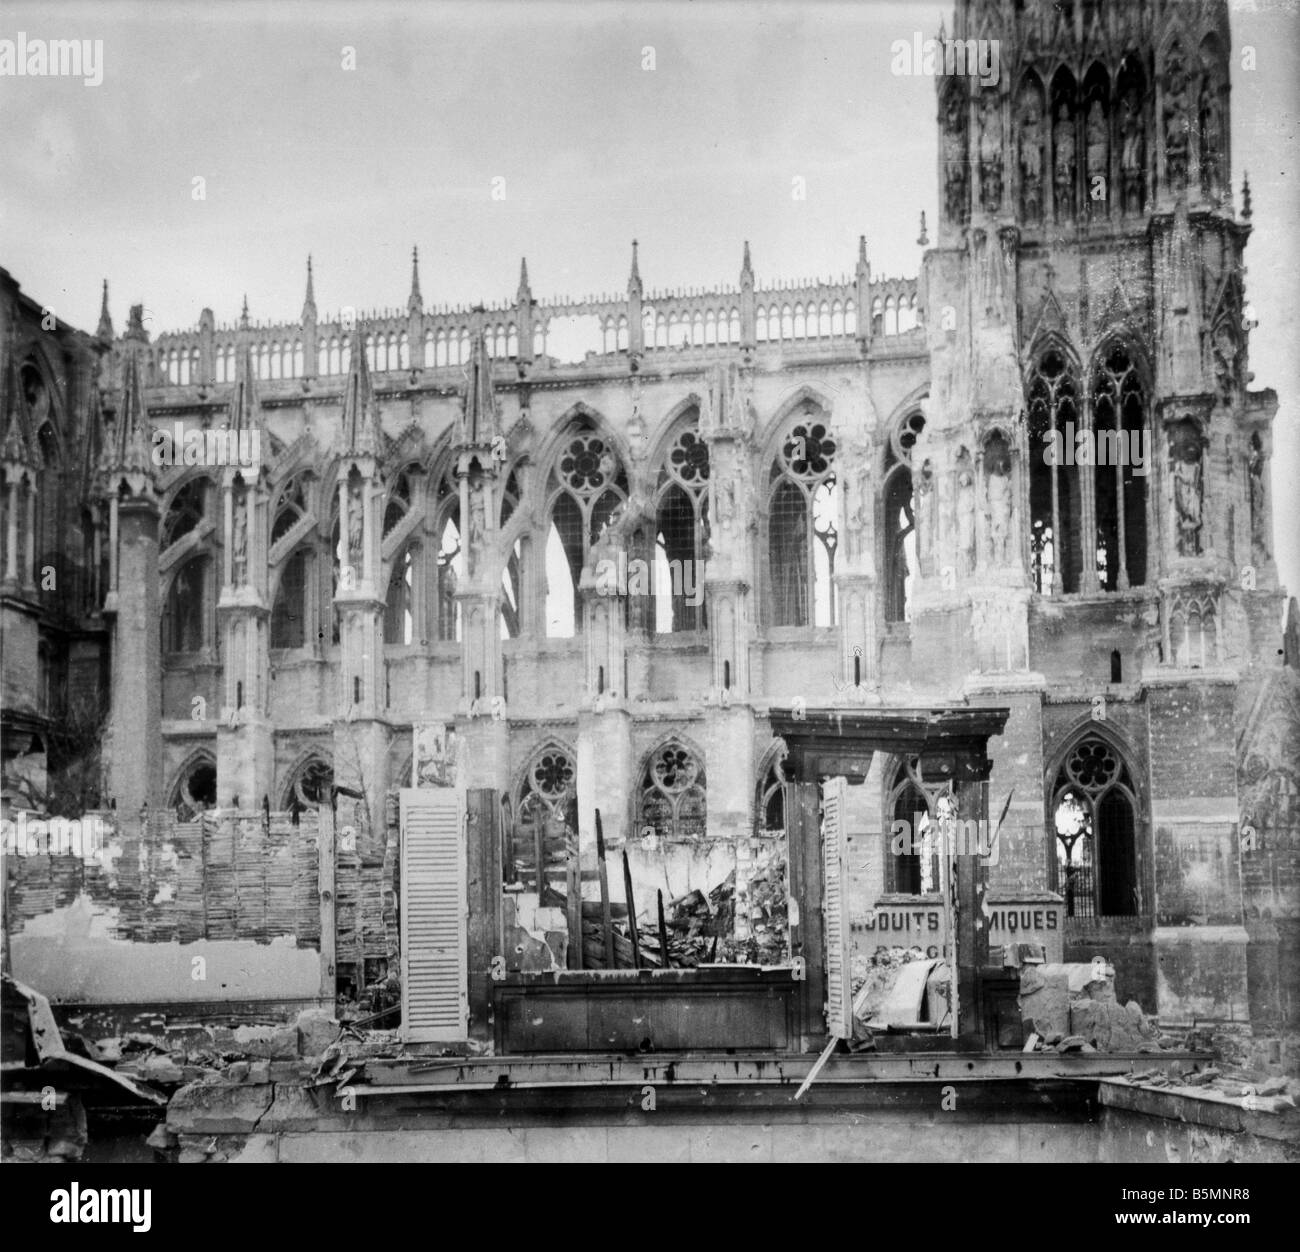 5FK R2 E1 1919 3 Reims Cathedral WWI Photo Reims France Dep Marne Cathedral War damage caused by the Germans in WWI exterior vie Stock Photo